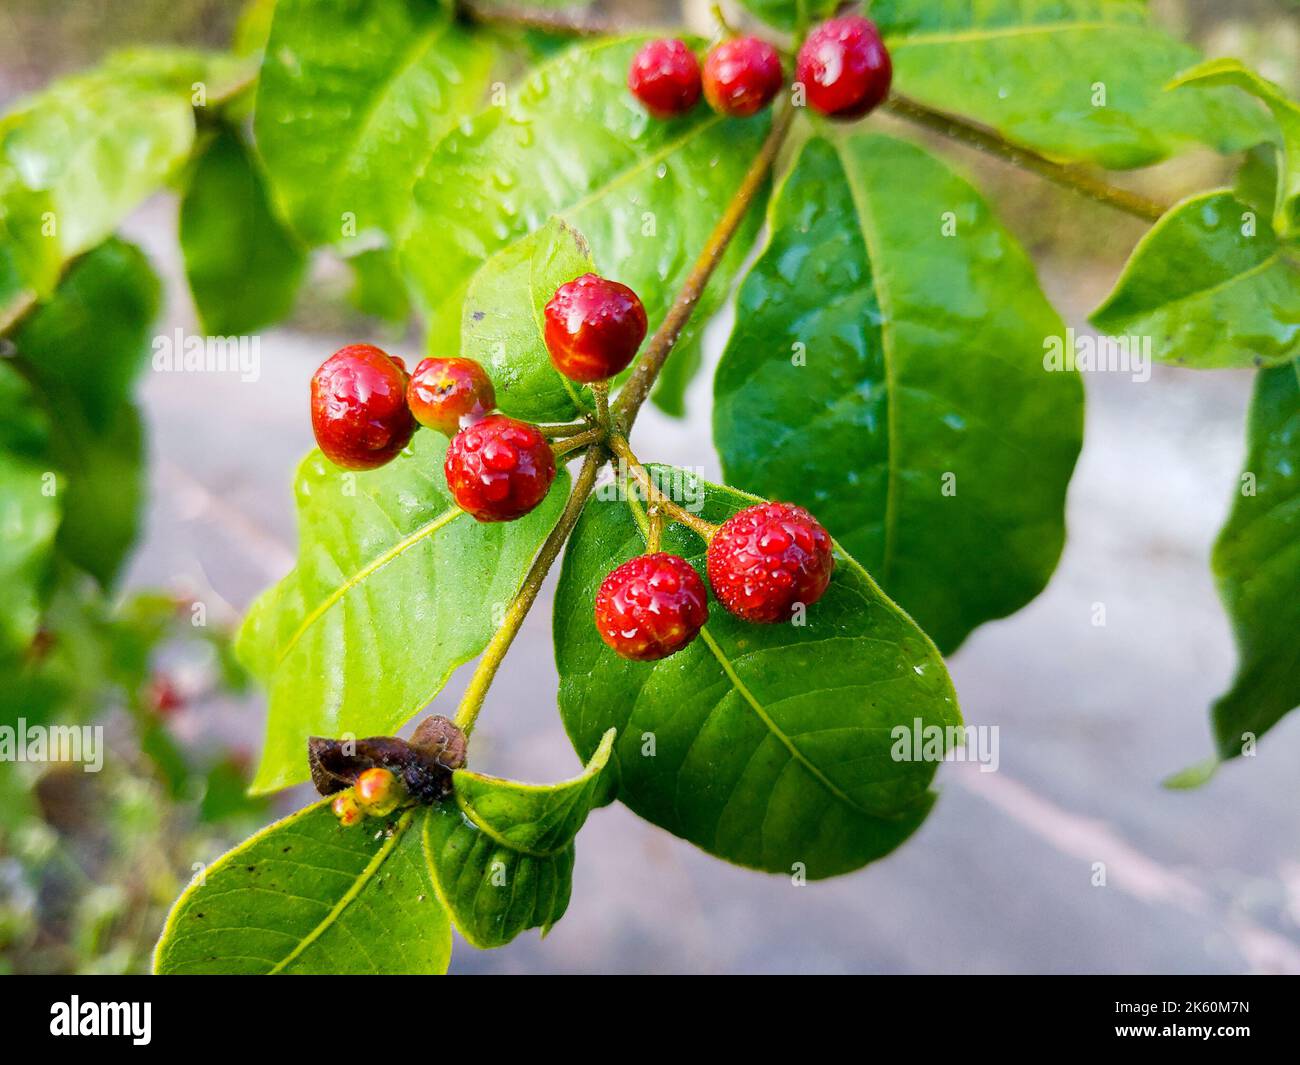 Fruits and leaves of Rauvolfia tetraphylla, commonly known as the be still tree or devil-pepper. Uttarakhand India. Stock Photo